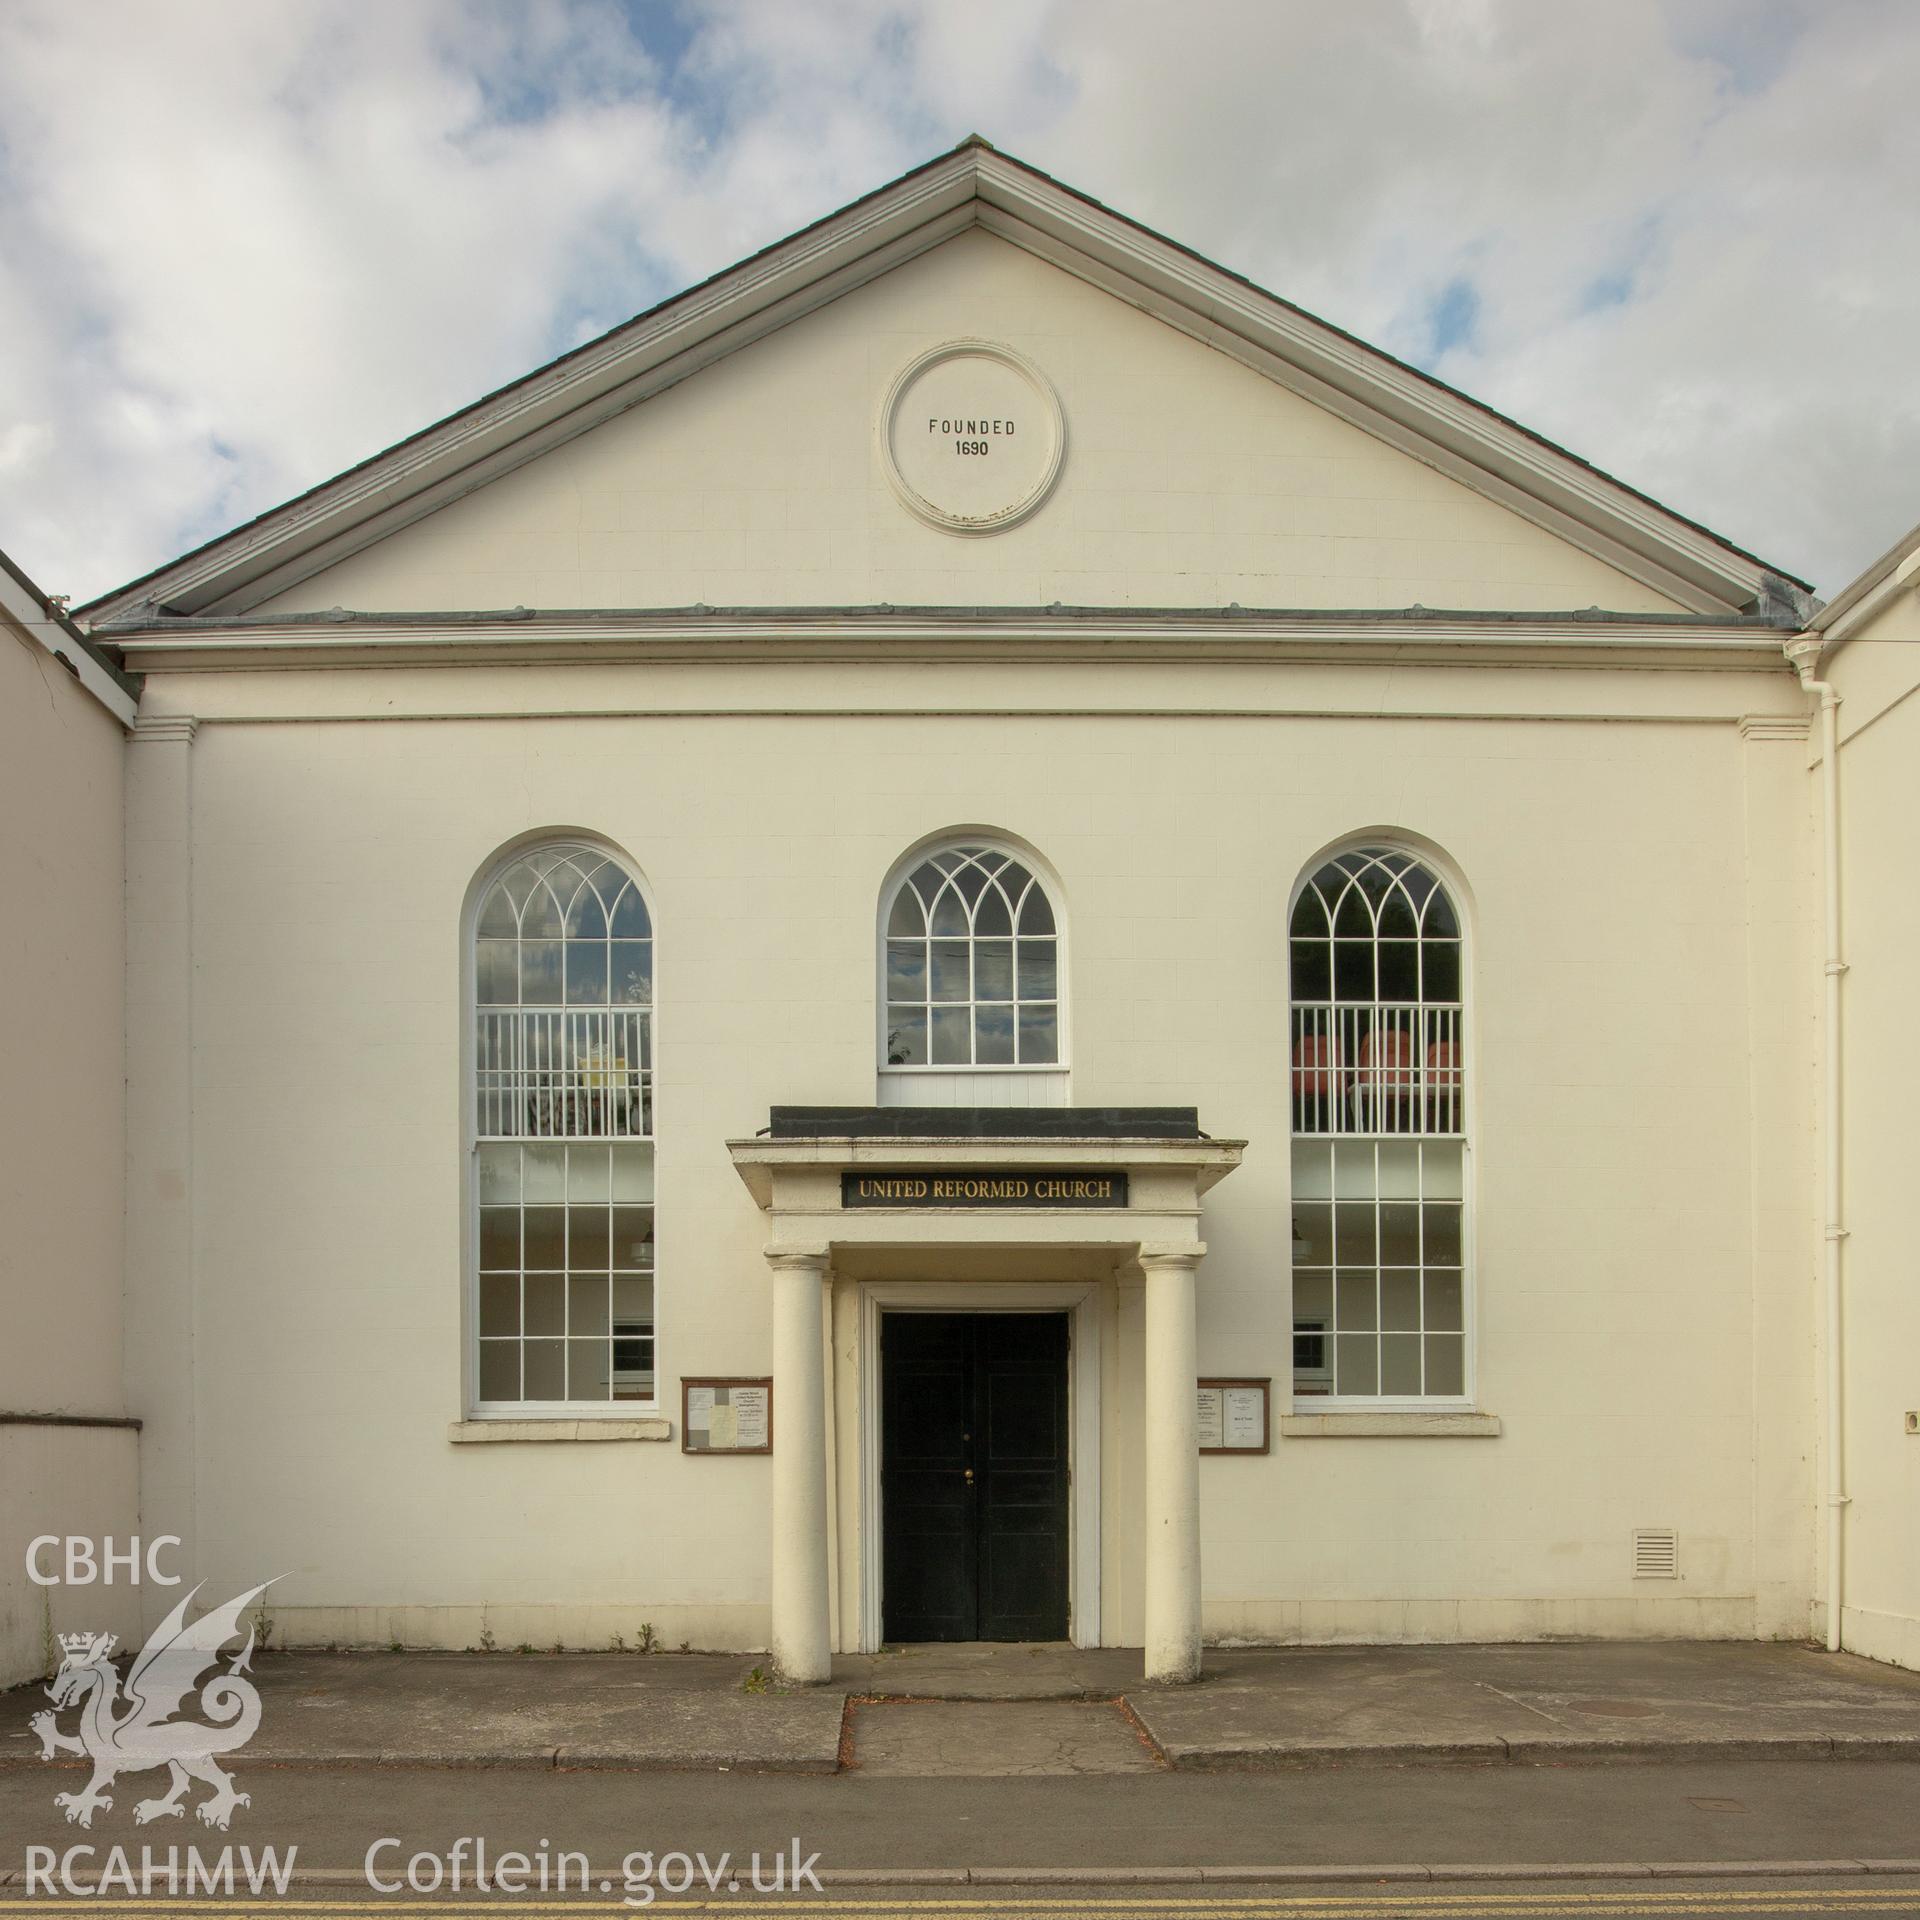 Colour photograph showing front elevation and entrance of Castel Street Congregational (United Reform) Chapel, Abergavenny. Photographed by Richard Barrett on 17th July 2018.